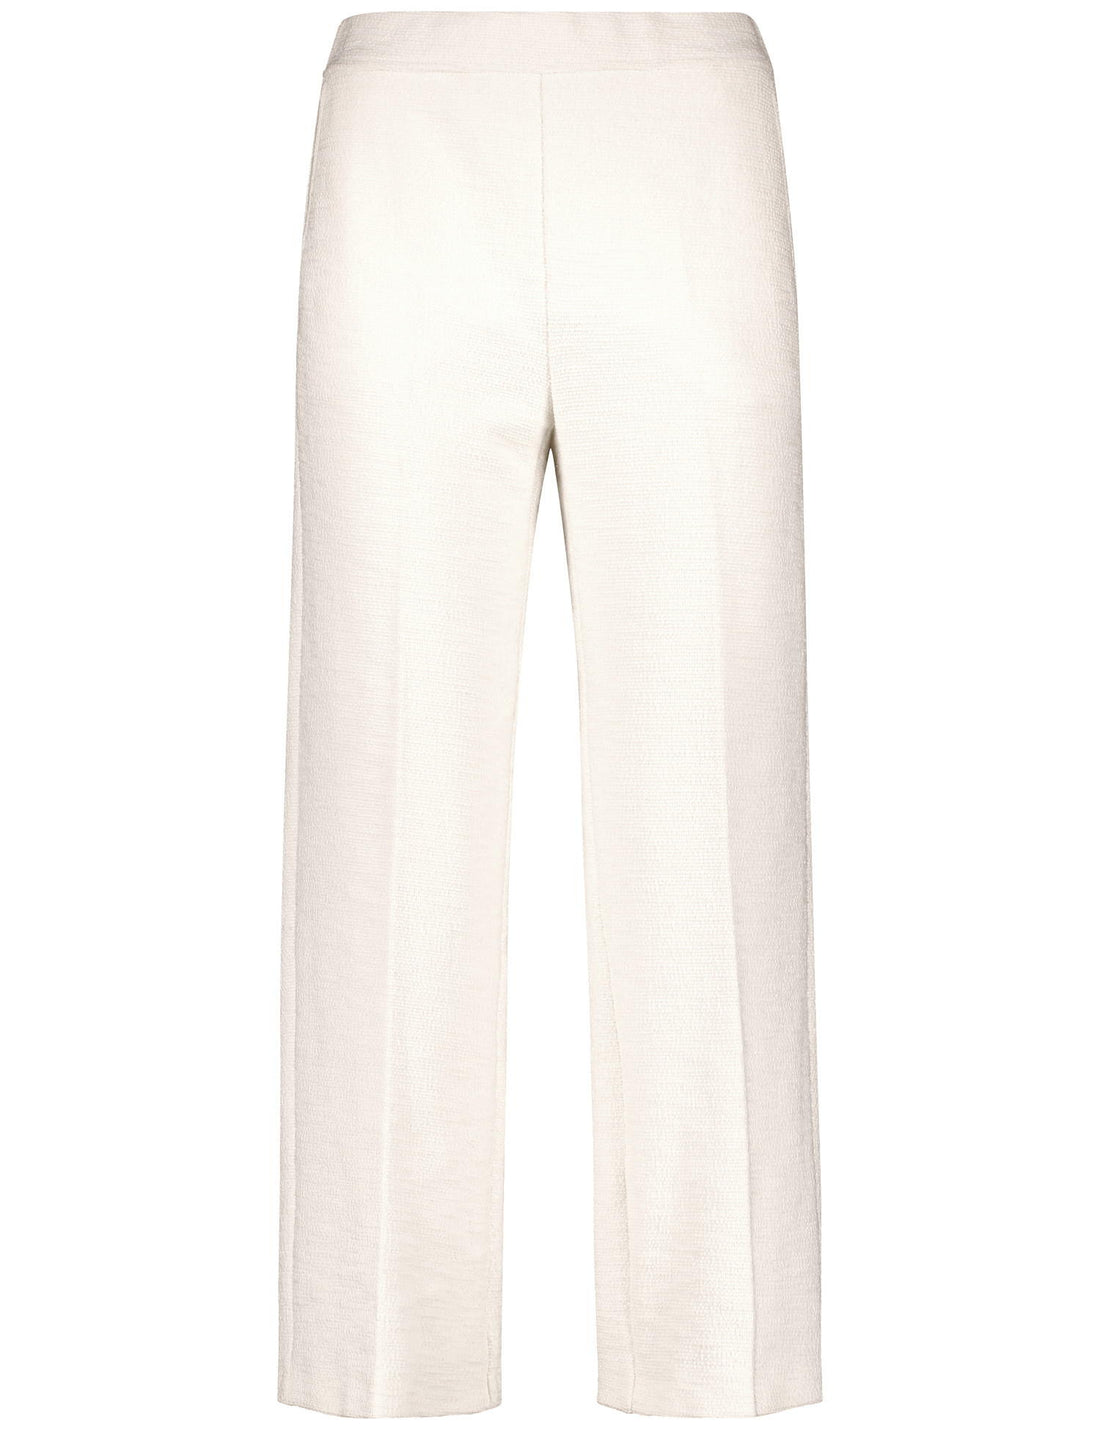 Comfortable Pull-On Trousers_320019-31266_90118_02